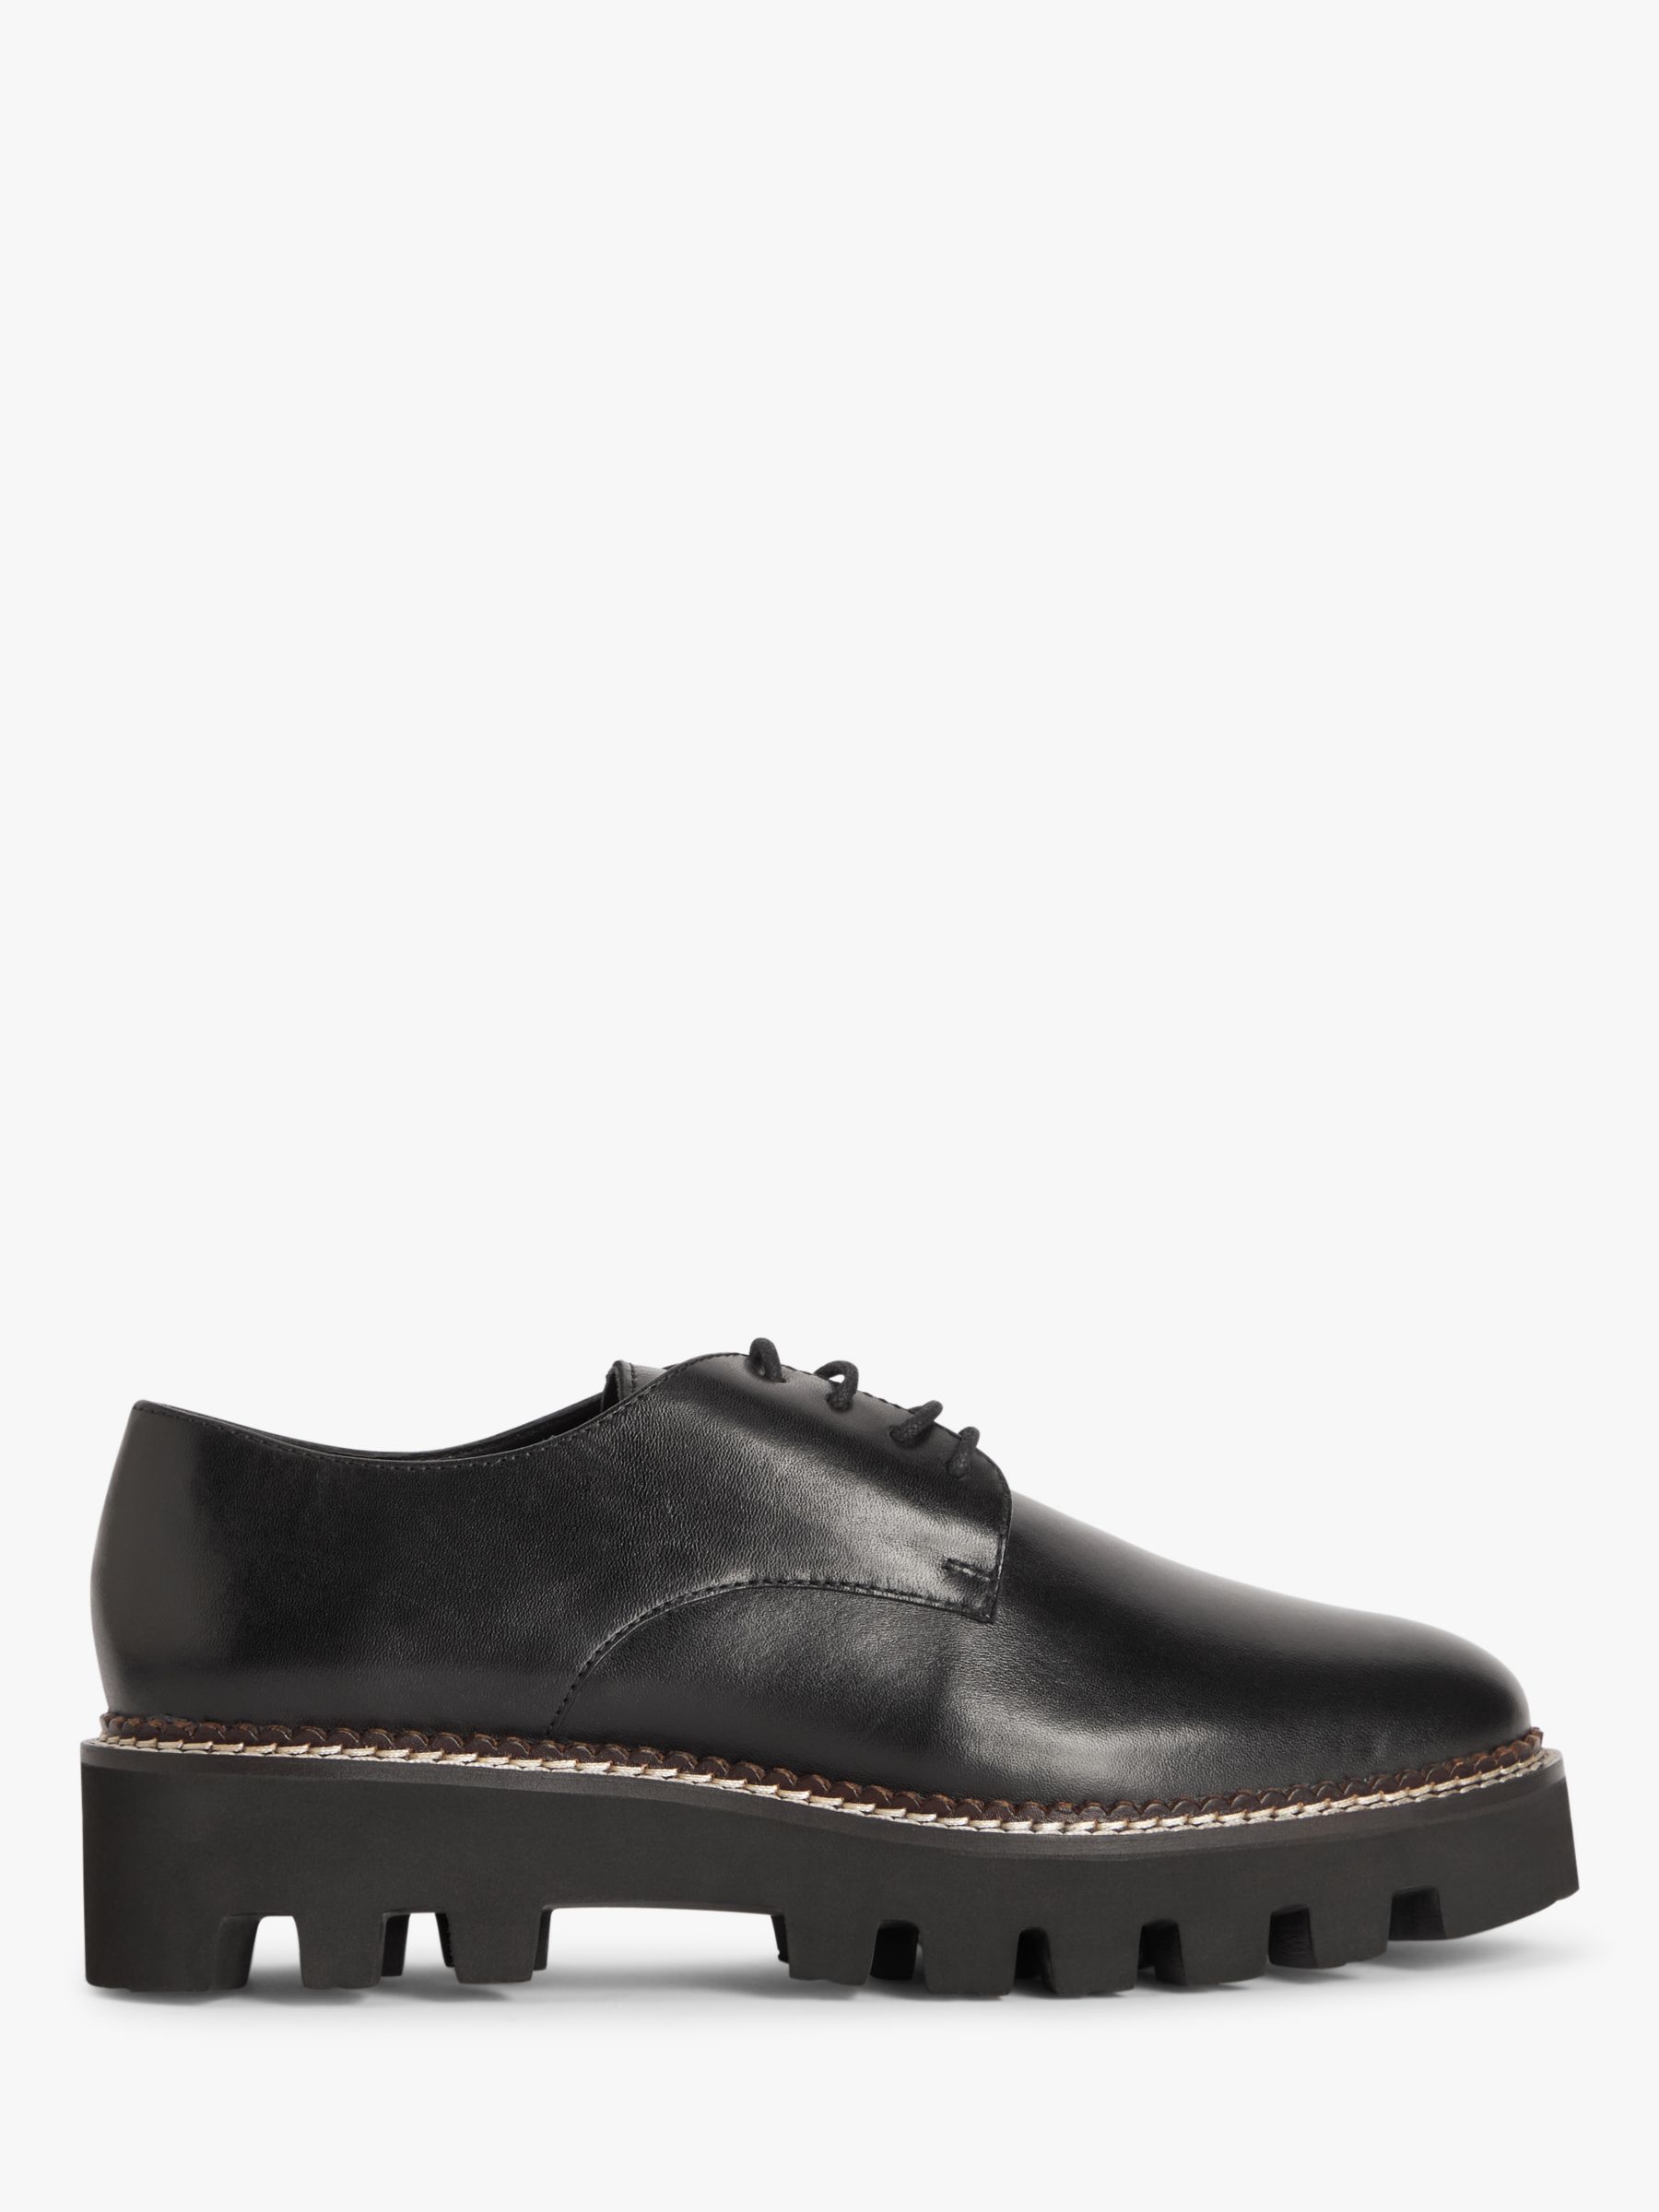 John Lewis ANYDAY Feigh Leather Loafers, Black at John Lewis & Partners